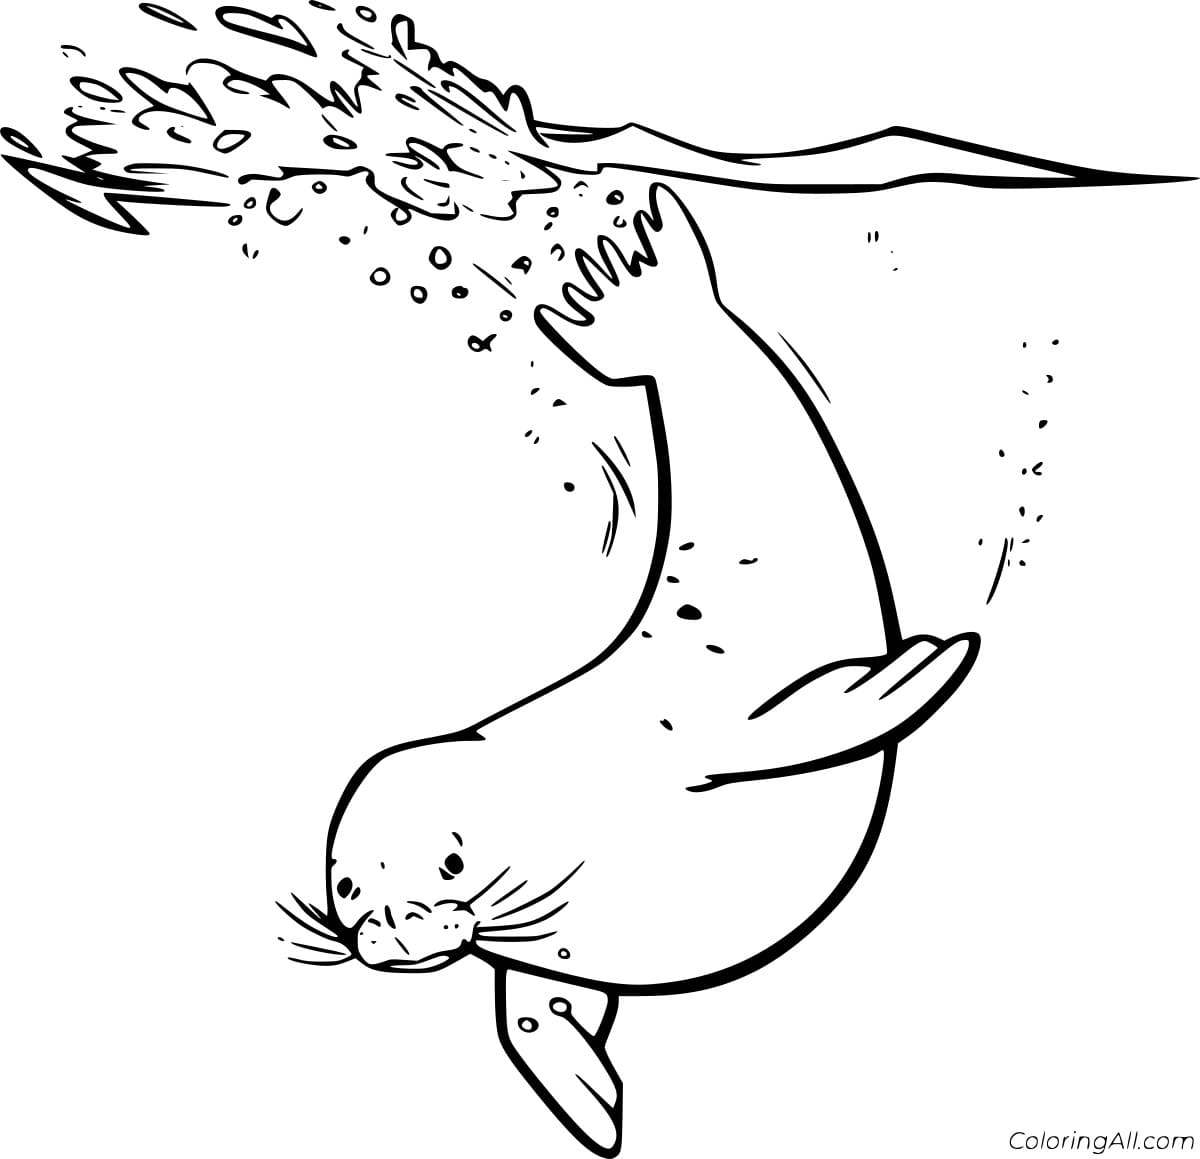 Underwater Seal Coloring Page